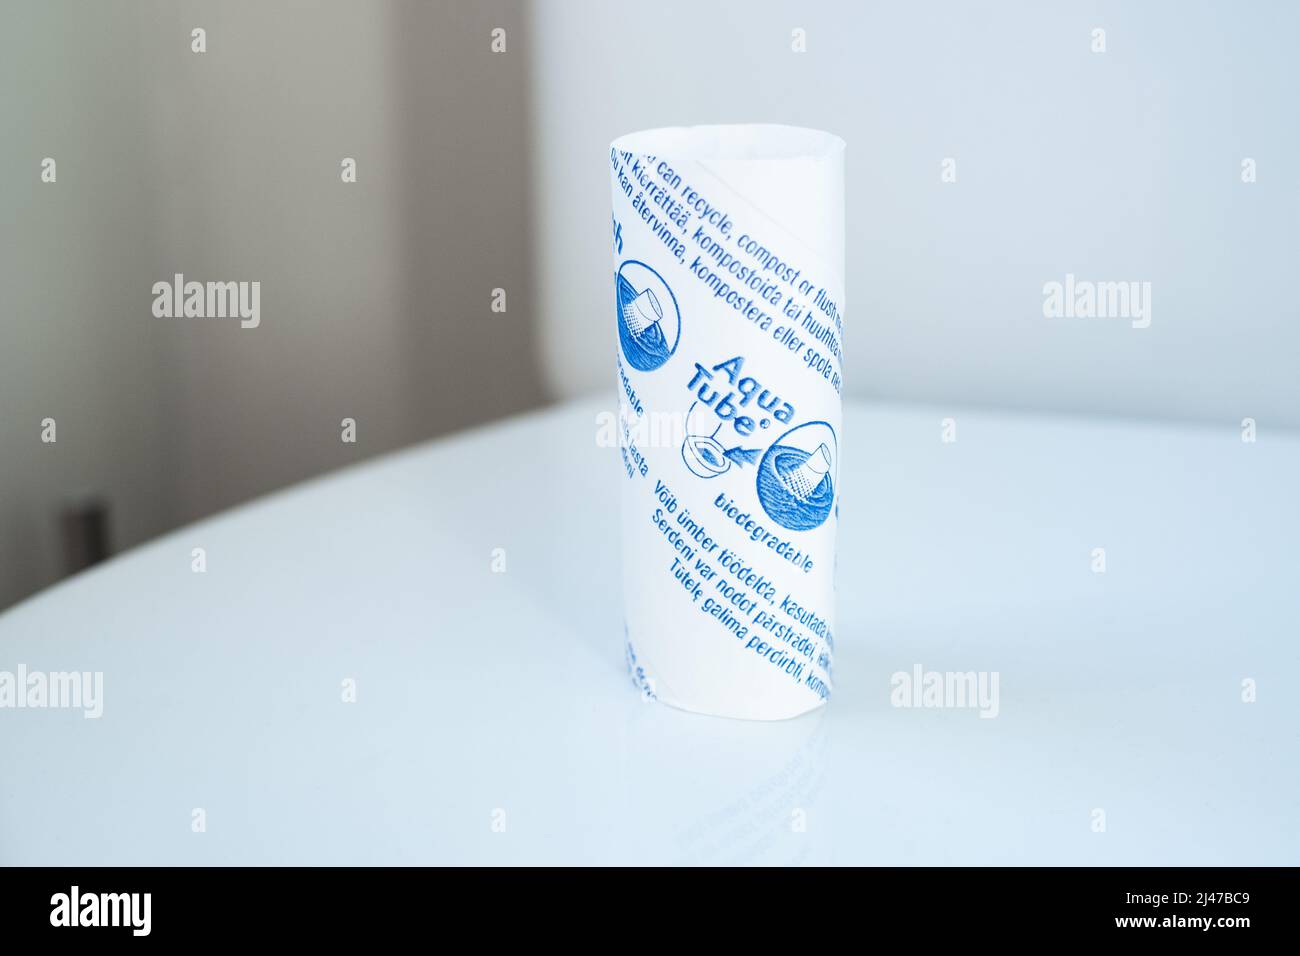 Aqua tube or Aquatube is toilet paper roll which can be flushed down the toilet. Biodegradable, recyclable and compostable toilet paper tube. Stock Photo